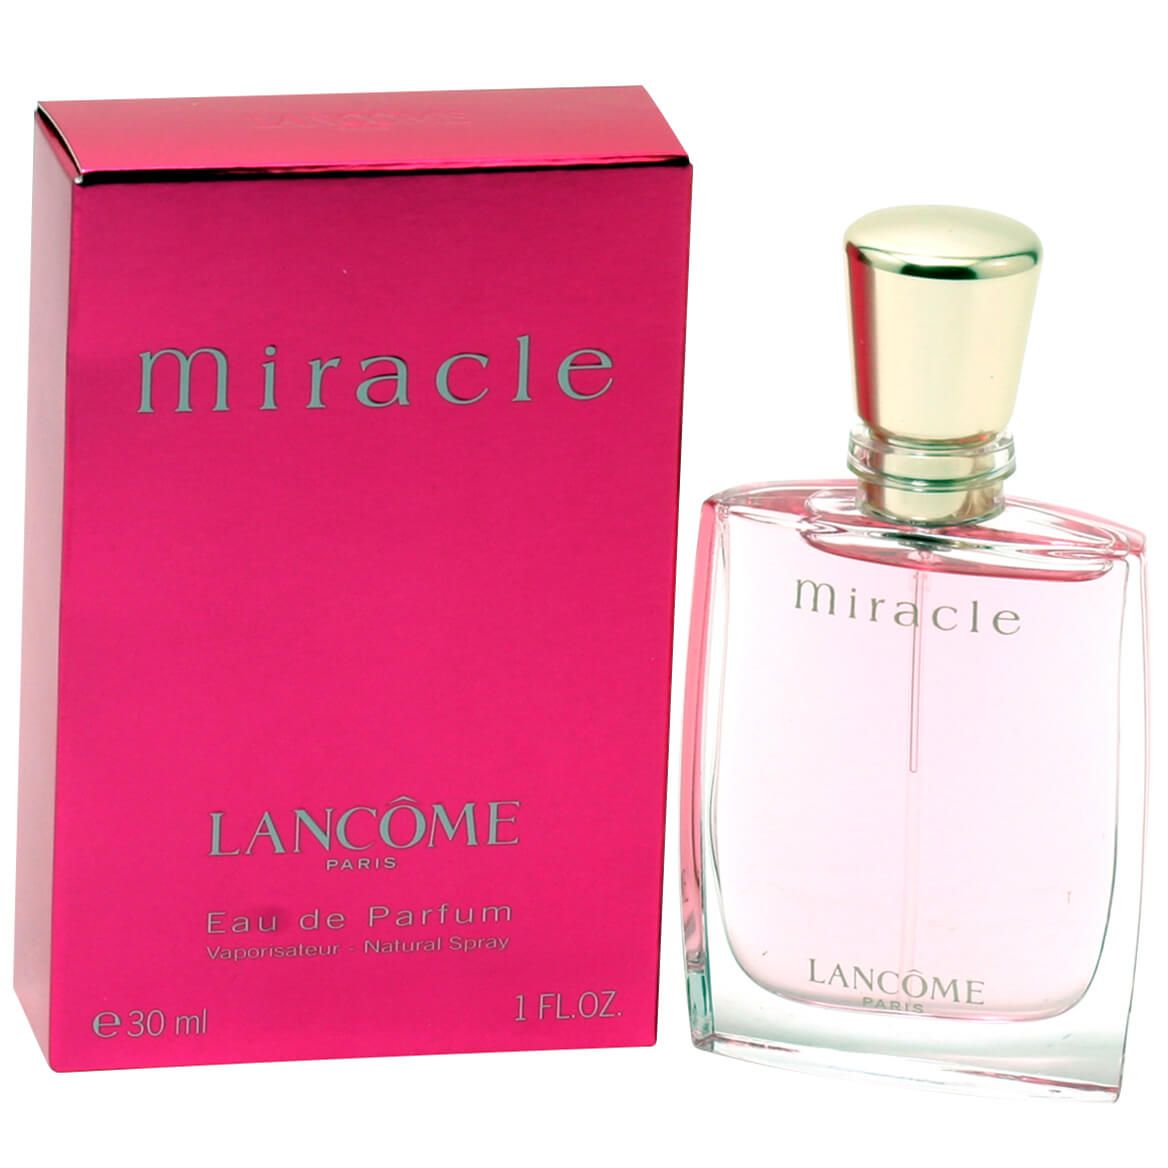 Miracle by Lancome for Women EDP, 1 fl. oz. + '-' + 377175